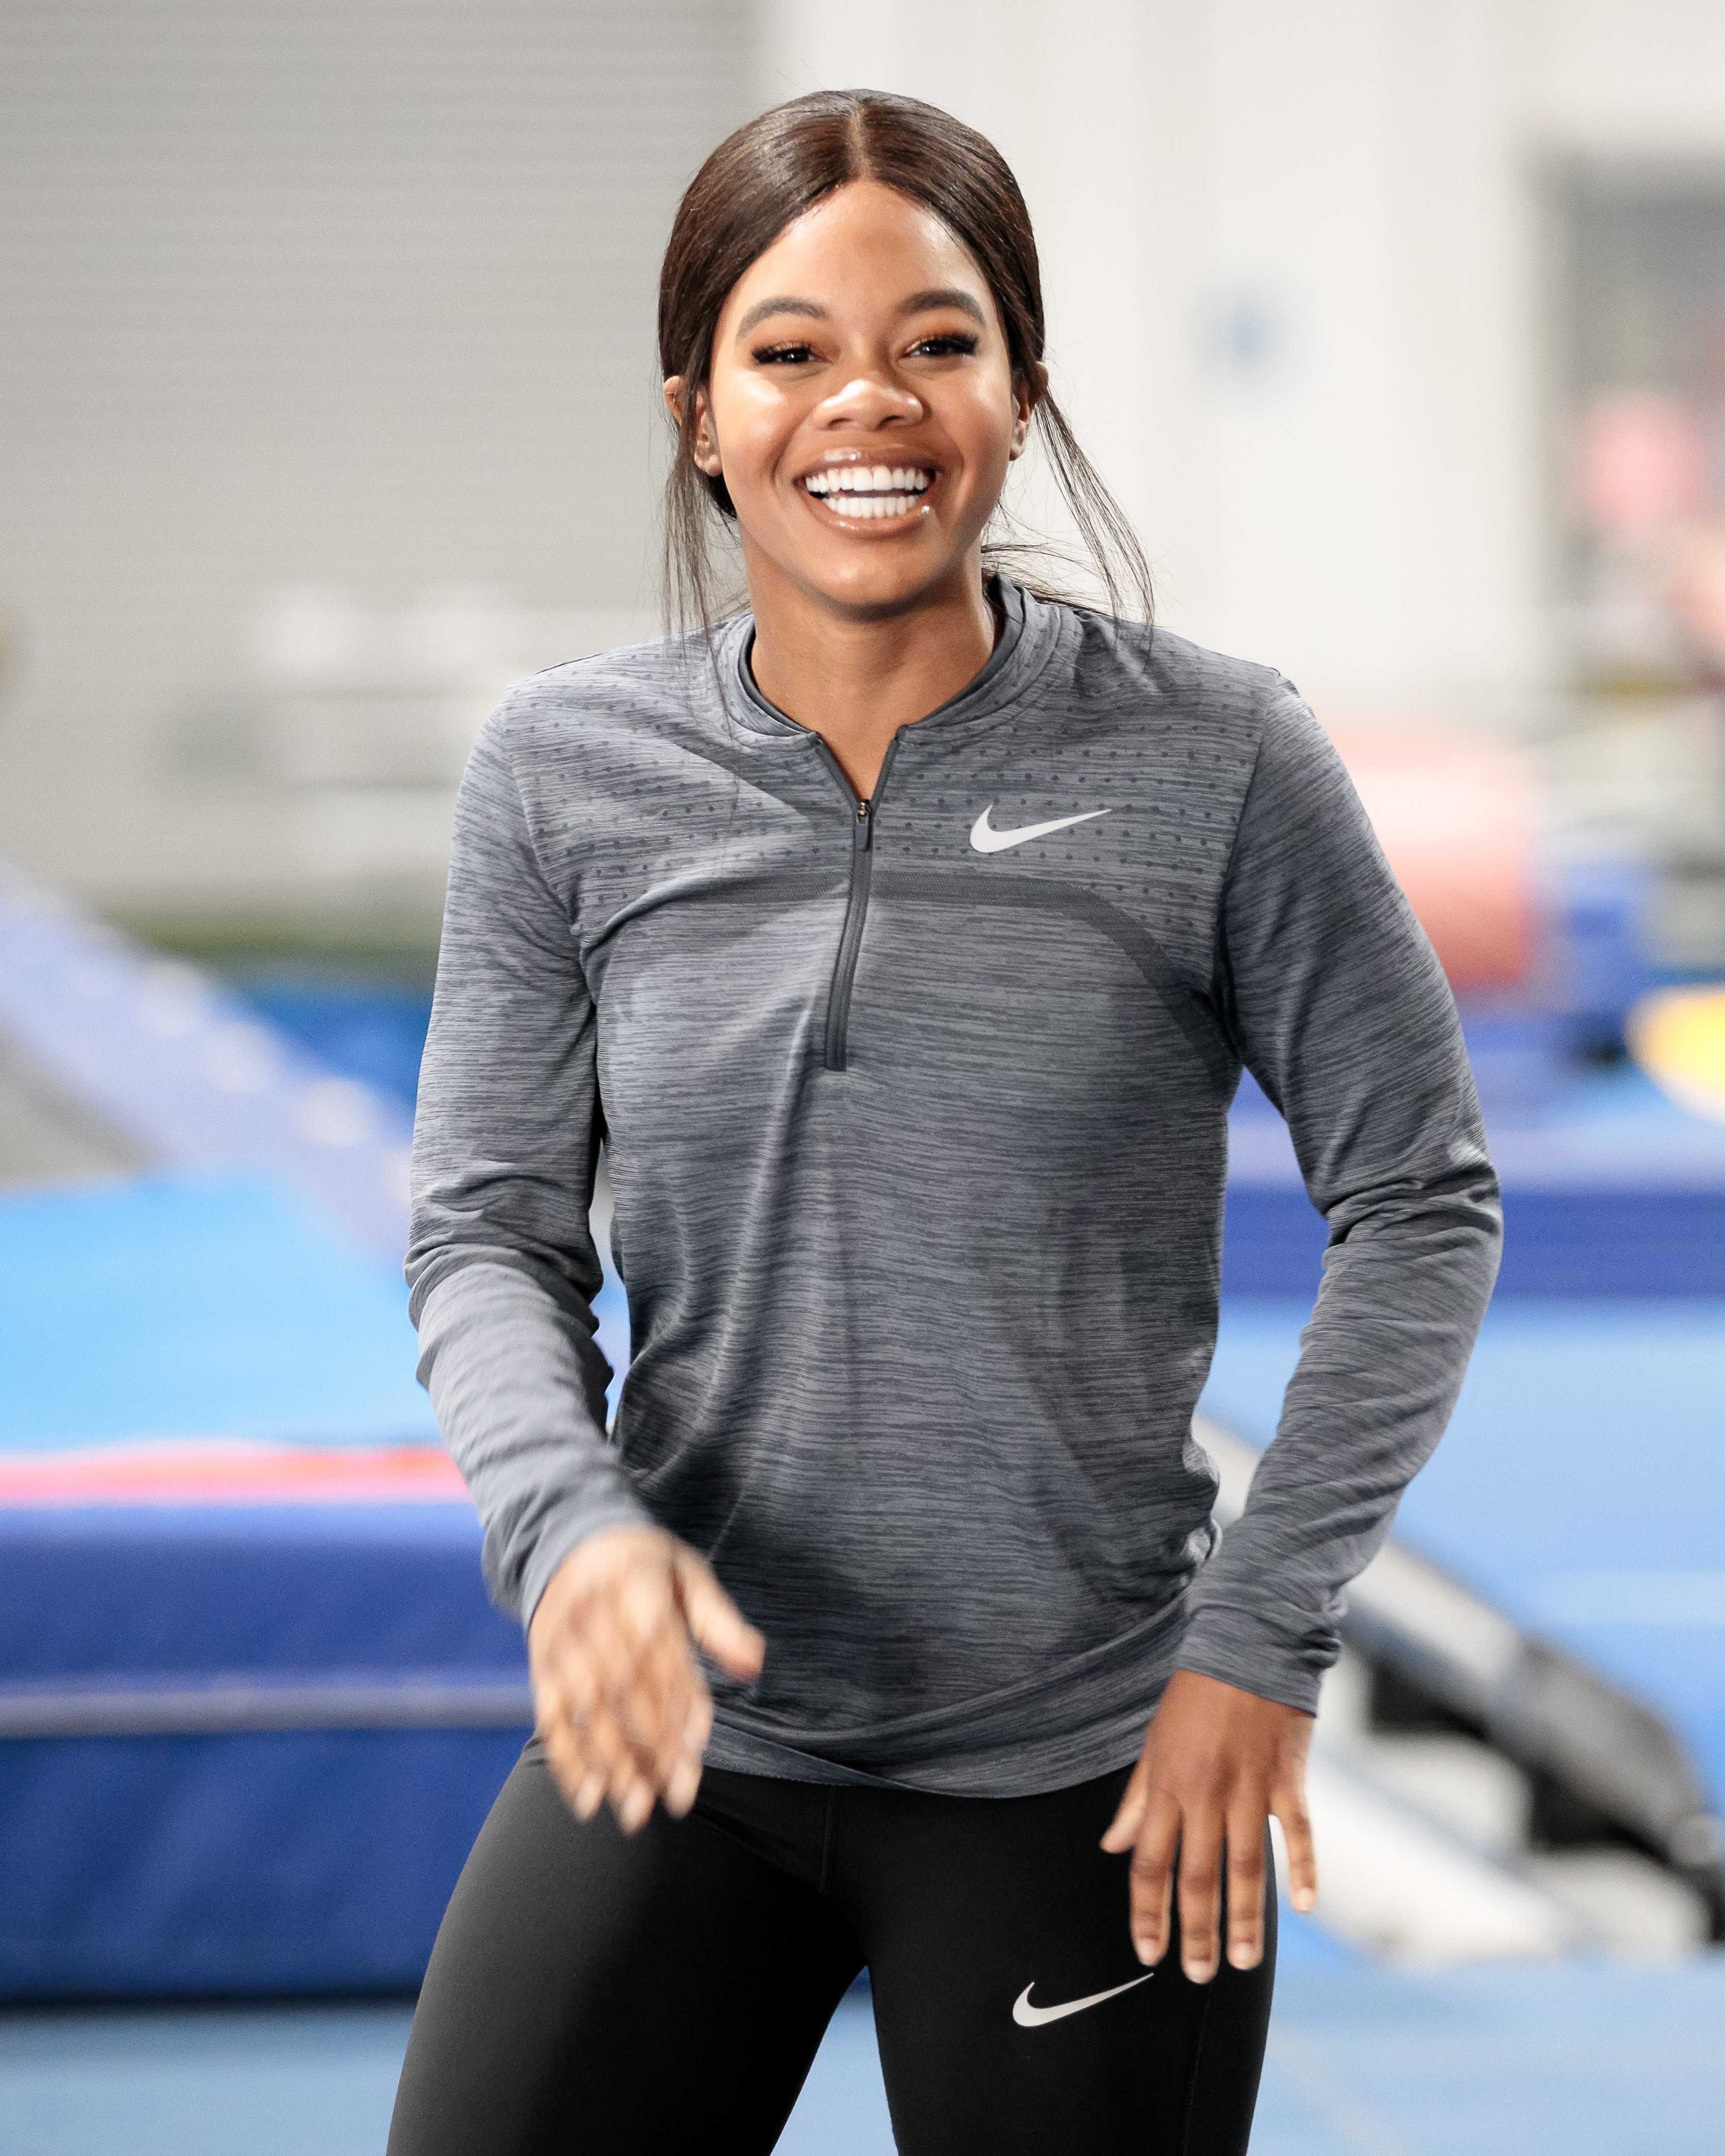 Gabby Douglas on the IMDb series “Special Skills” in Los Angeles, California on March 2, 2020 | Photo: Rich Polk/Getty Images